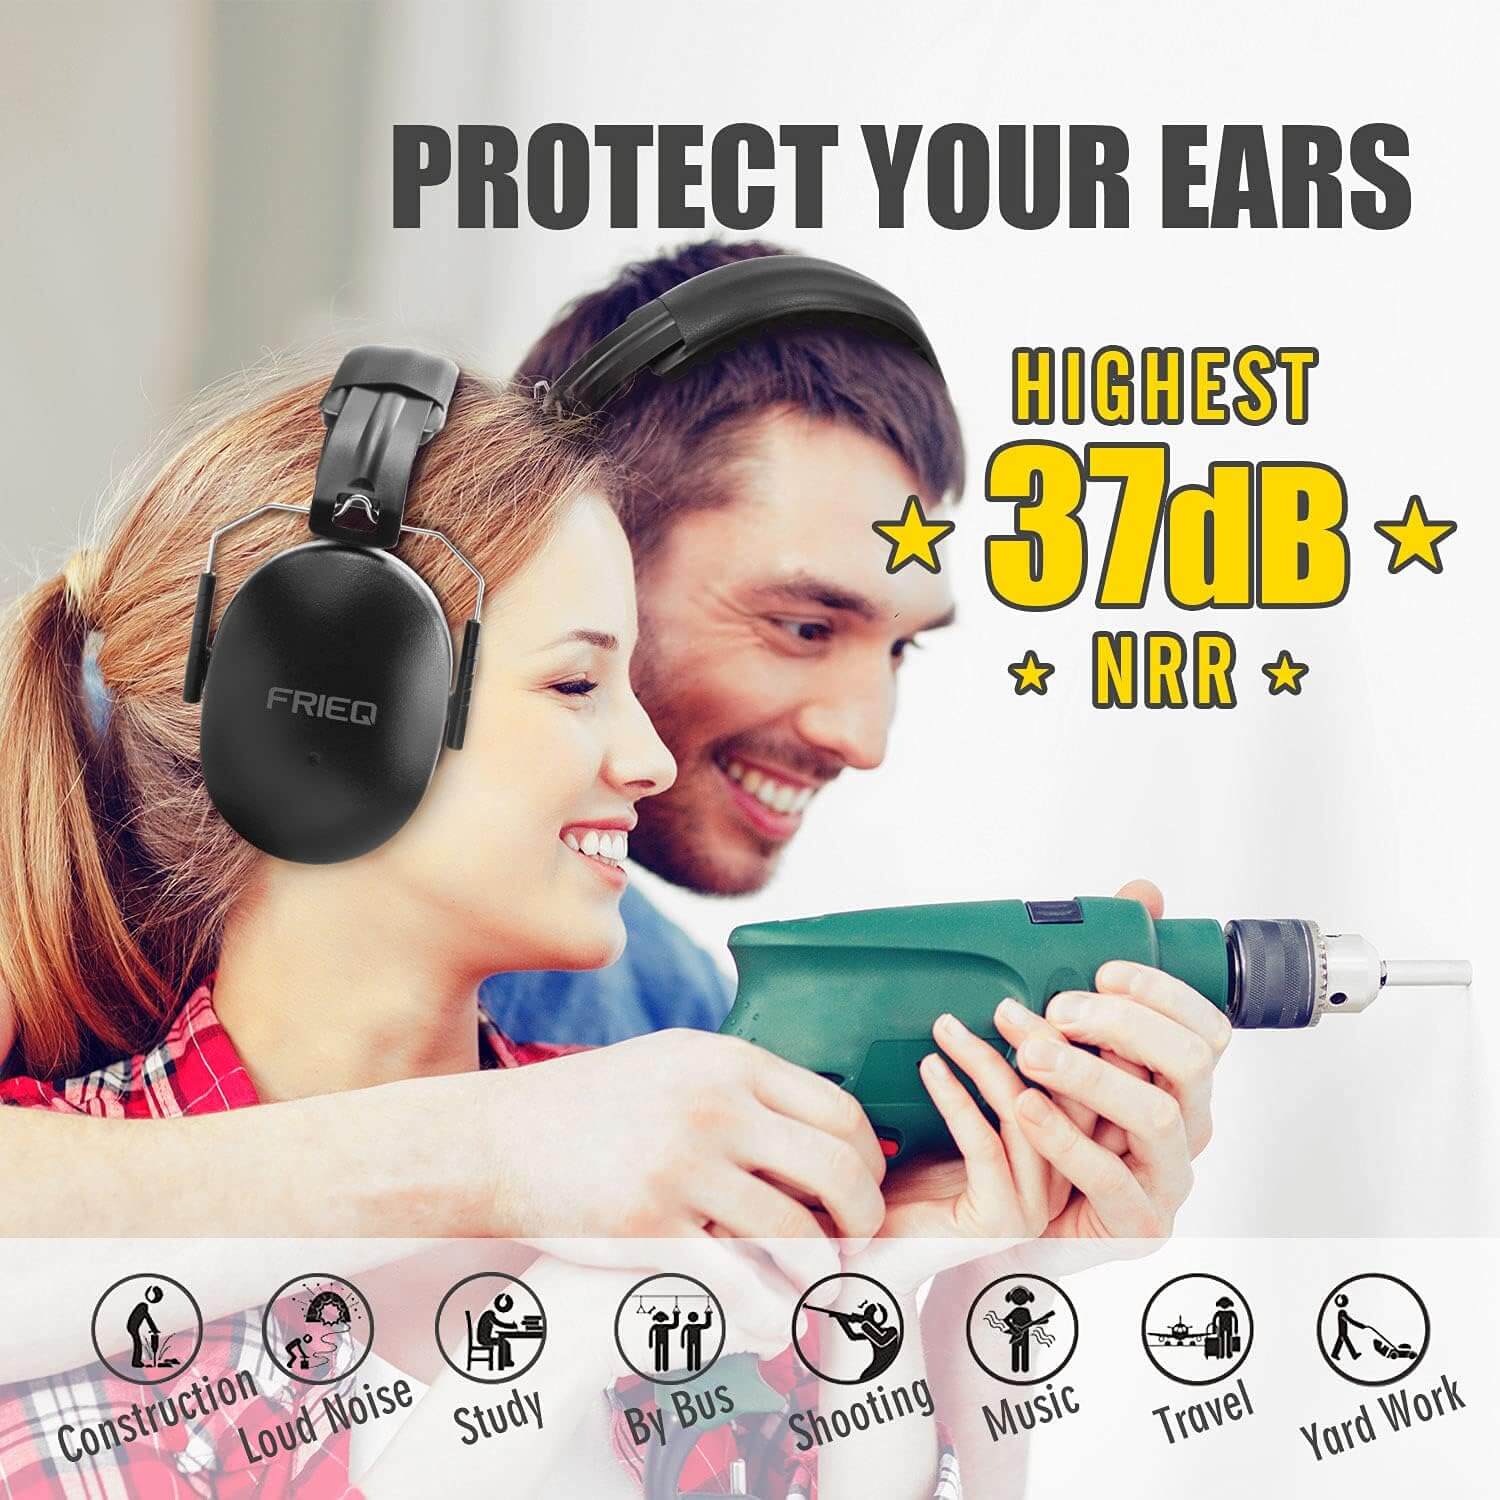 FRiEQ 37 dB NRR Sound Technology Safety Ear Muffs with LRPu Foam for Shooting, Music & Yard Work - Large & Small